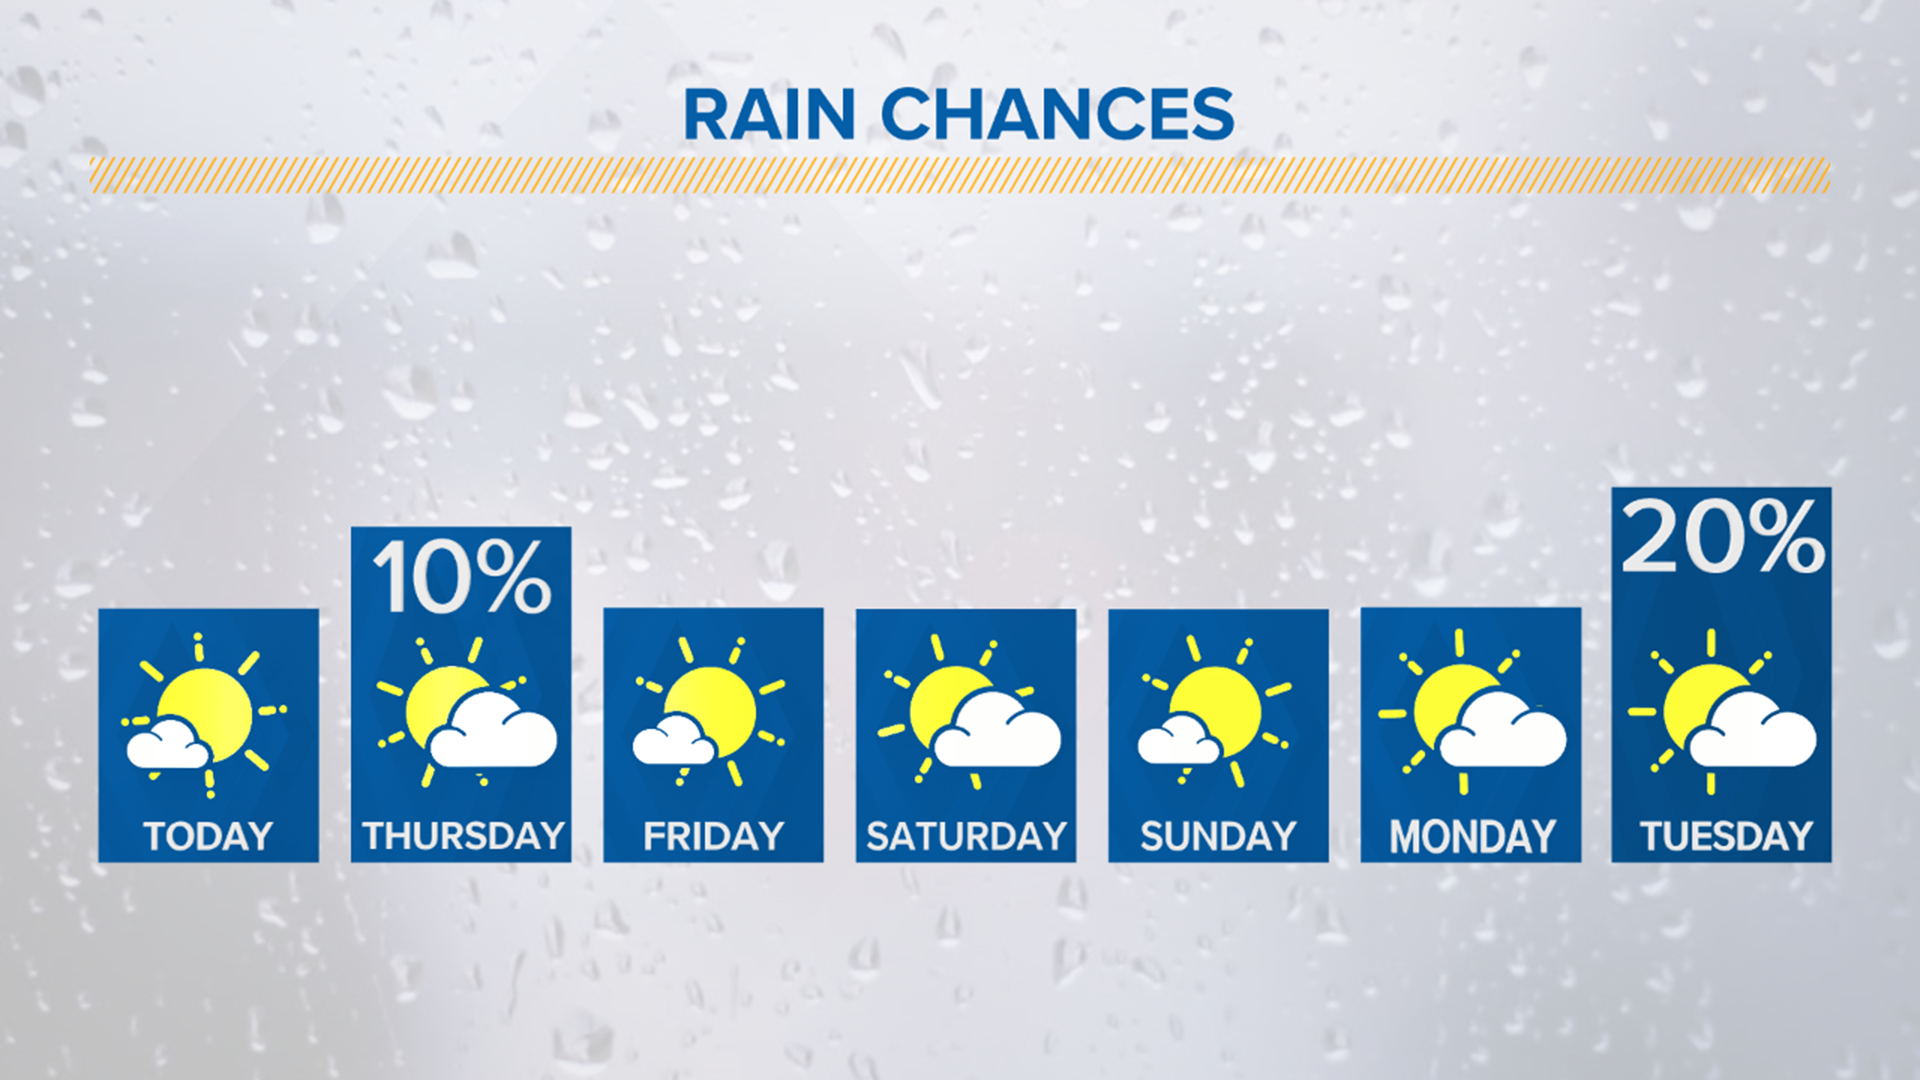 Your local weather forecast, updated daily by the KCEN Weather Team